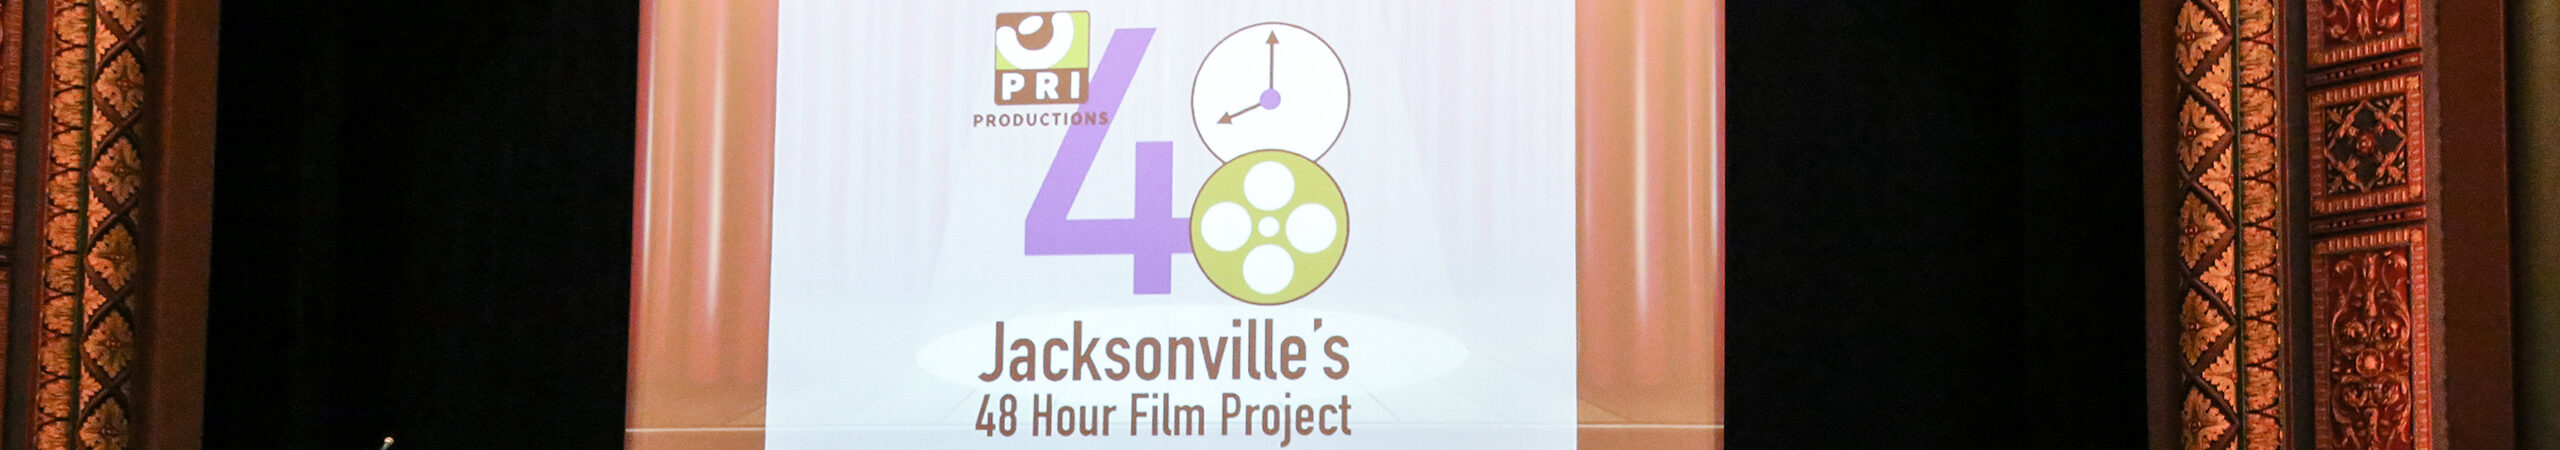 Jacksonville 48 Hour Film Project: Screening Group B